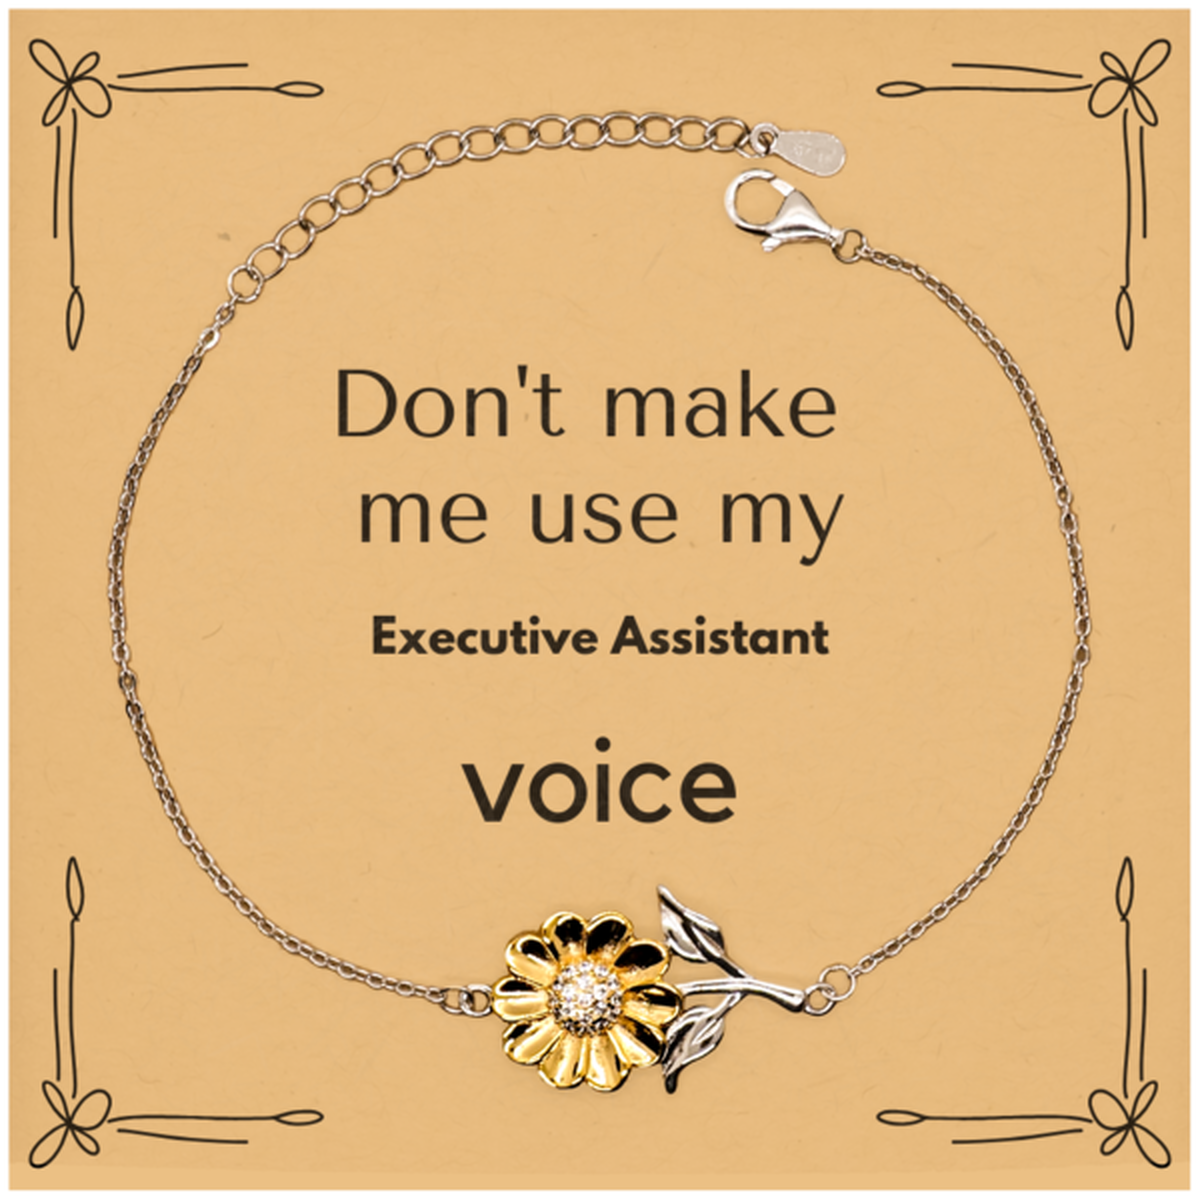 Don't make me use my Executive Assistant voice, Sarcasm Executive Assistant Card Gifts, Christmas Executive Assistant Sunflower Bracelet Birthday Unique Gifts For Executive Assistant Coworkers, Men, Women, Colleague, Friends